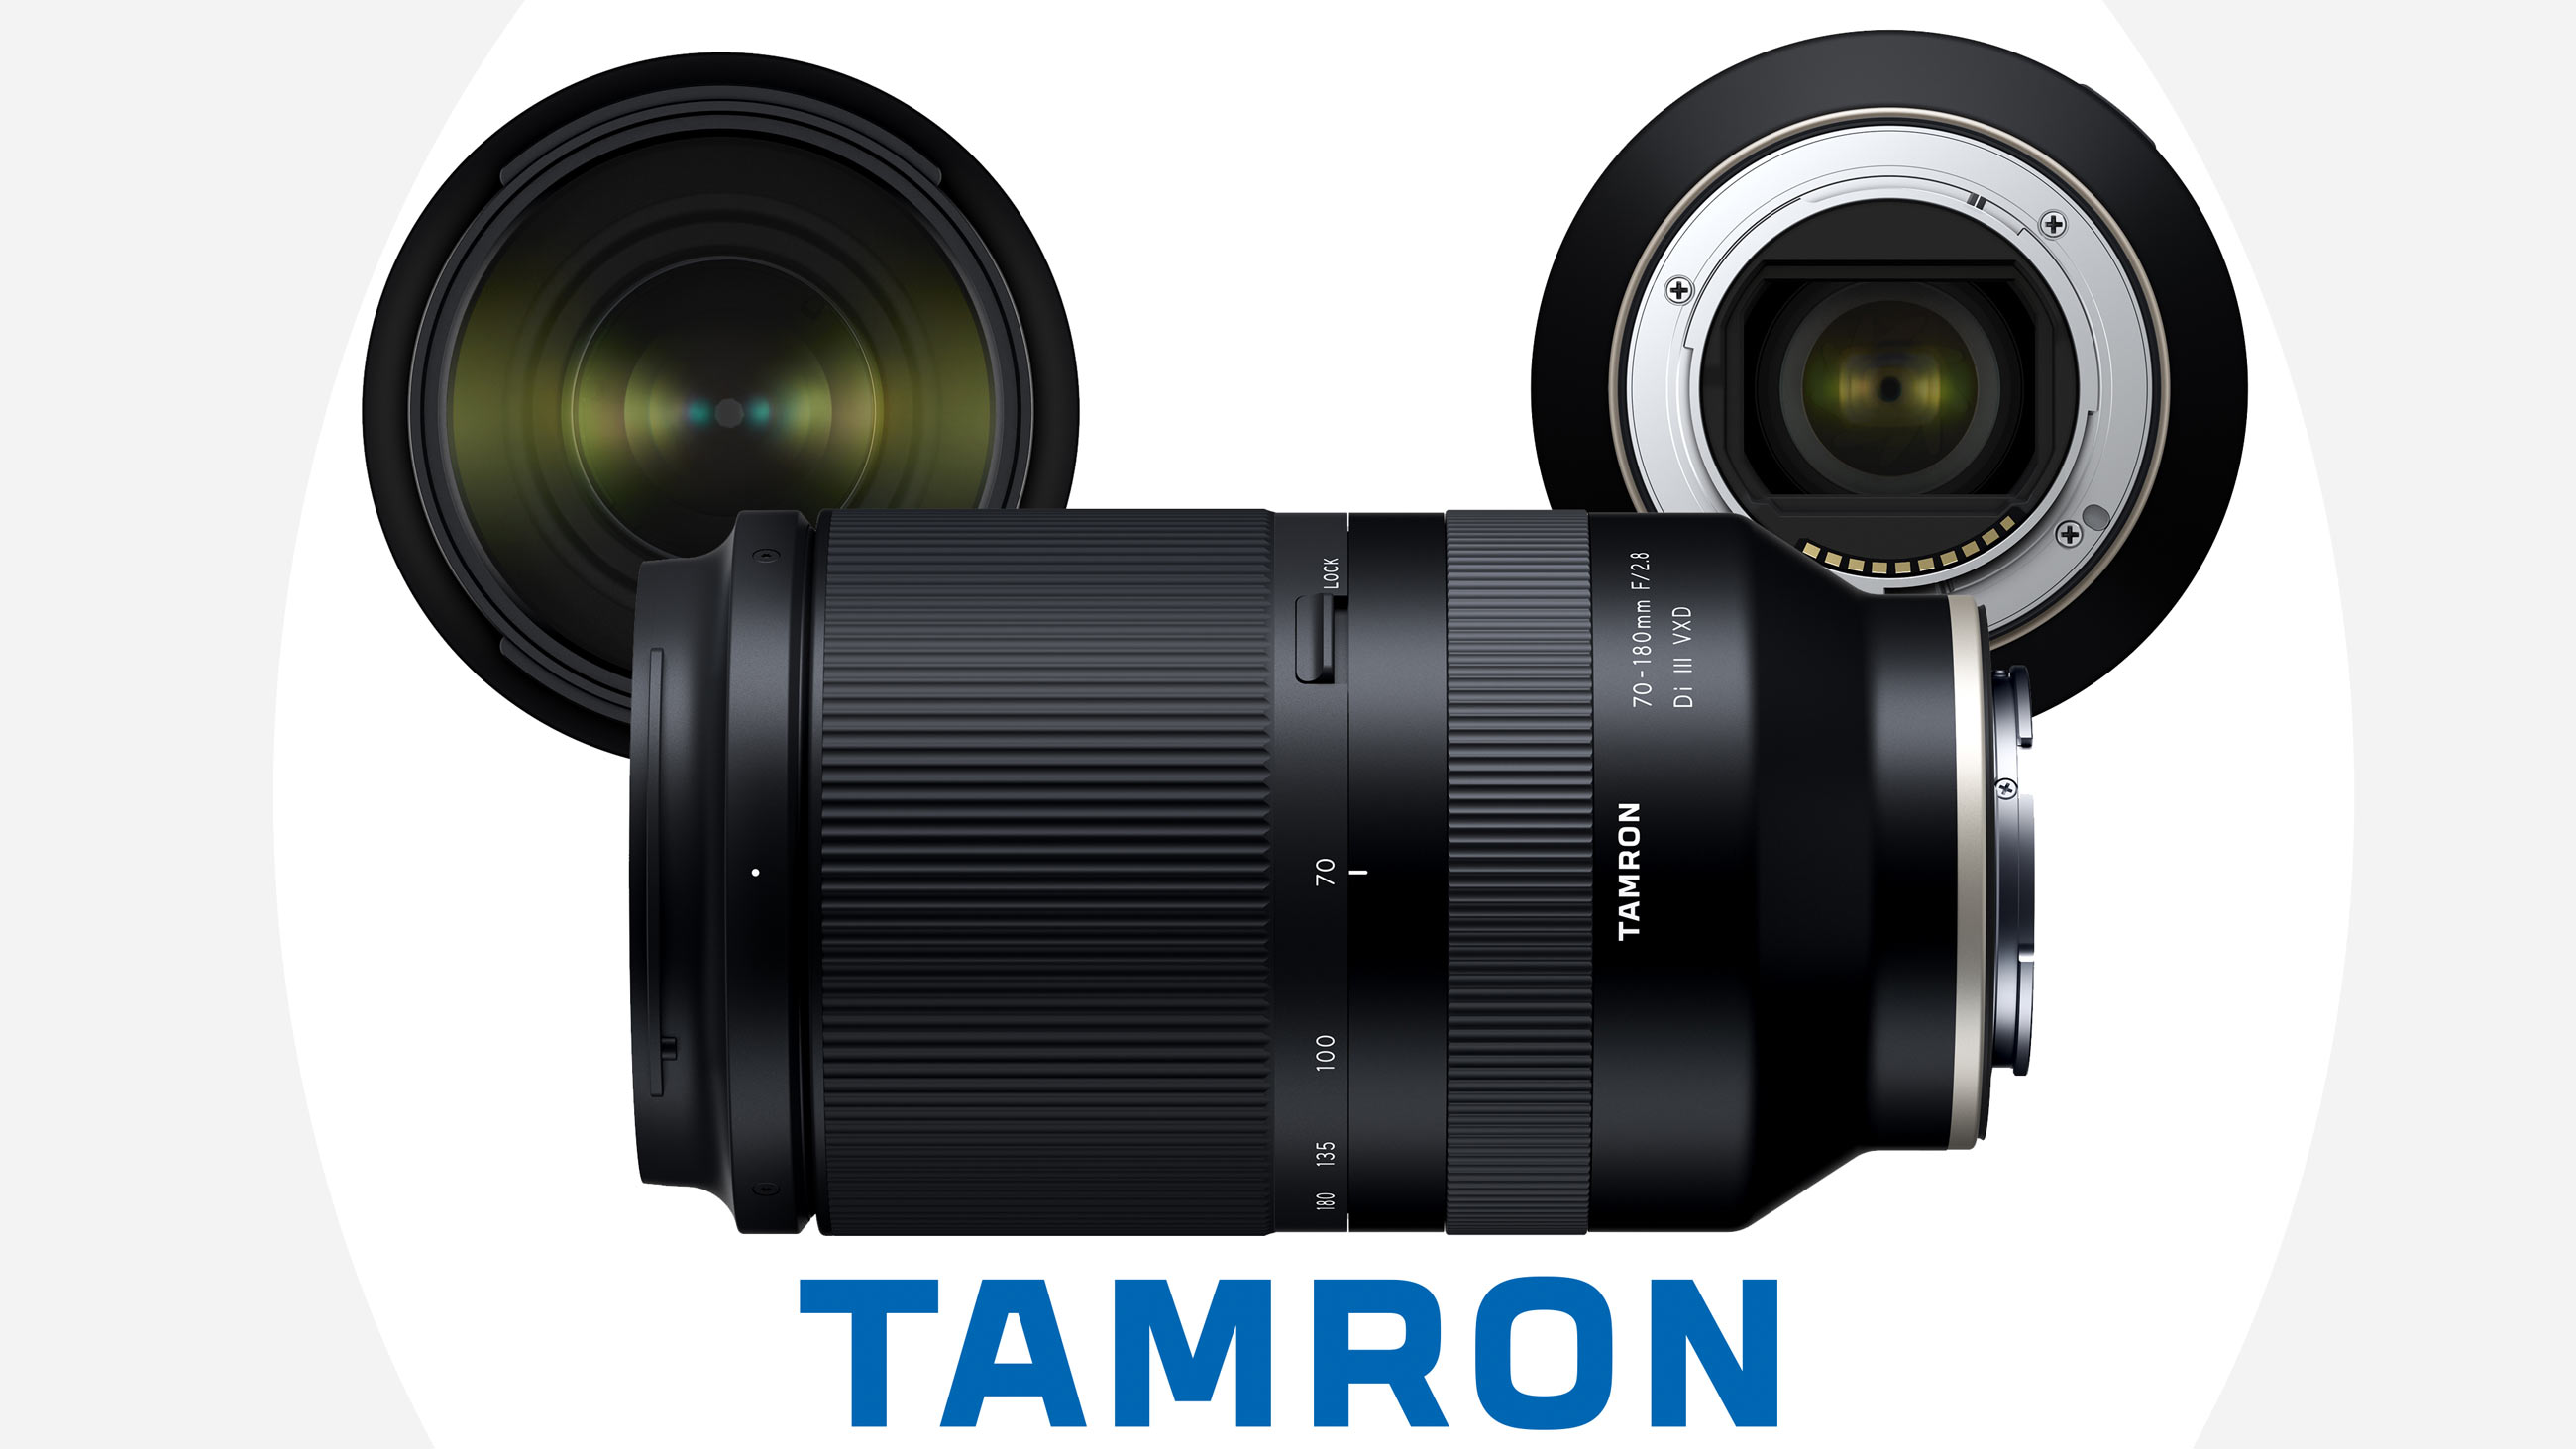 Tamron 70-180mm lens, front and back elements